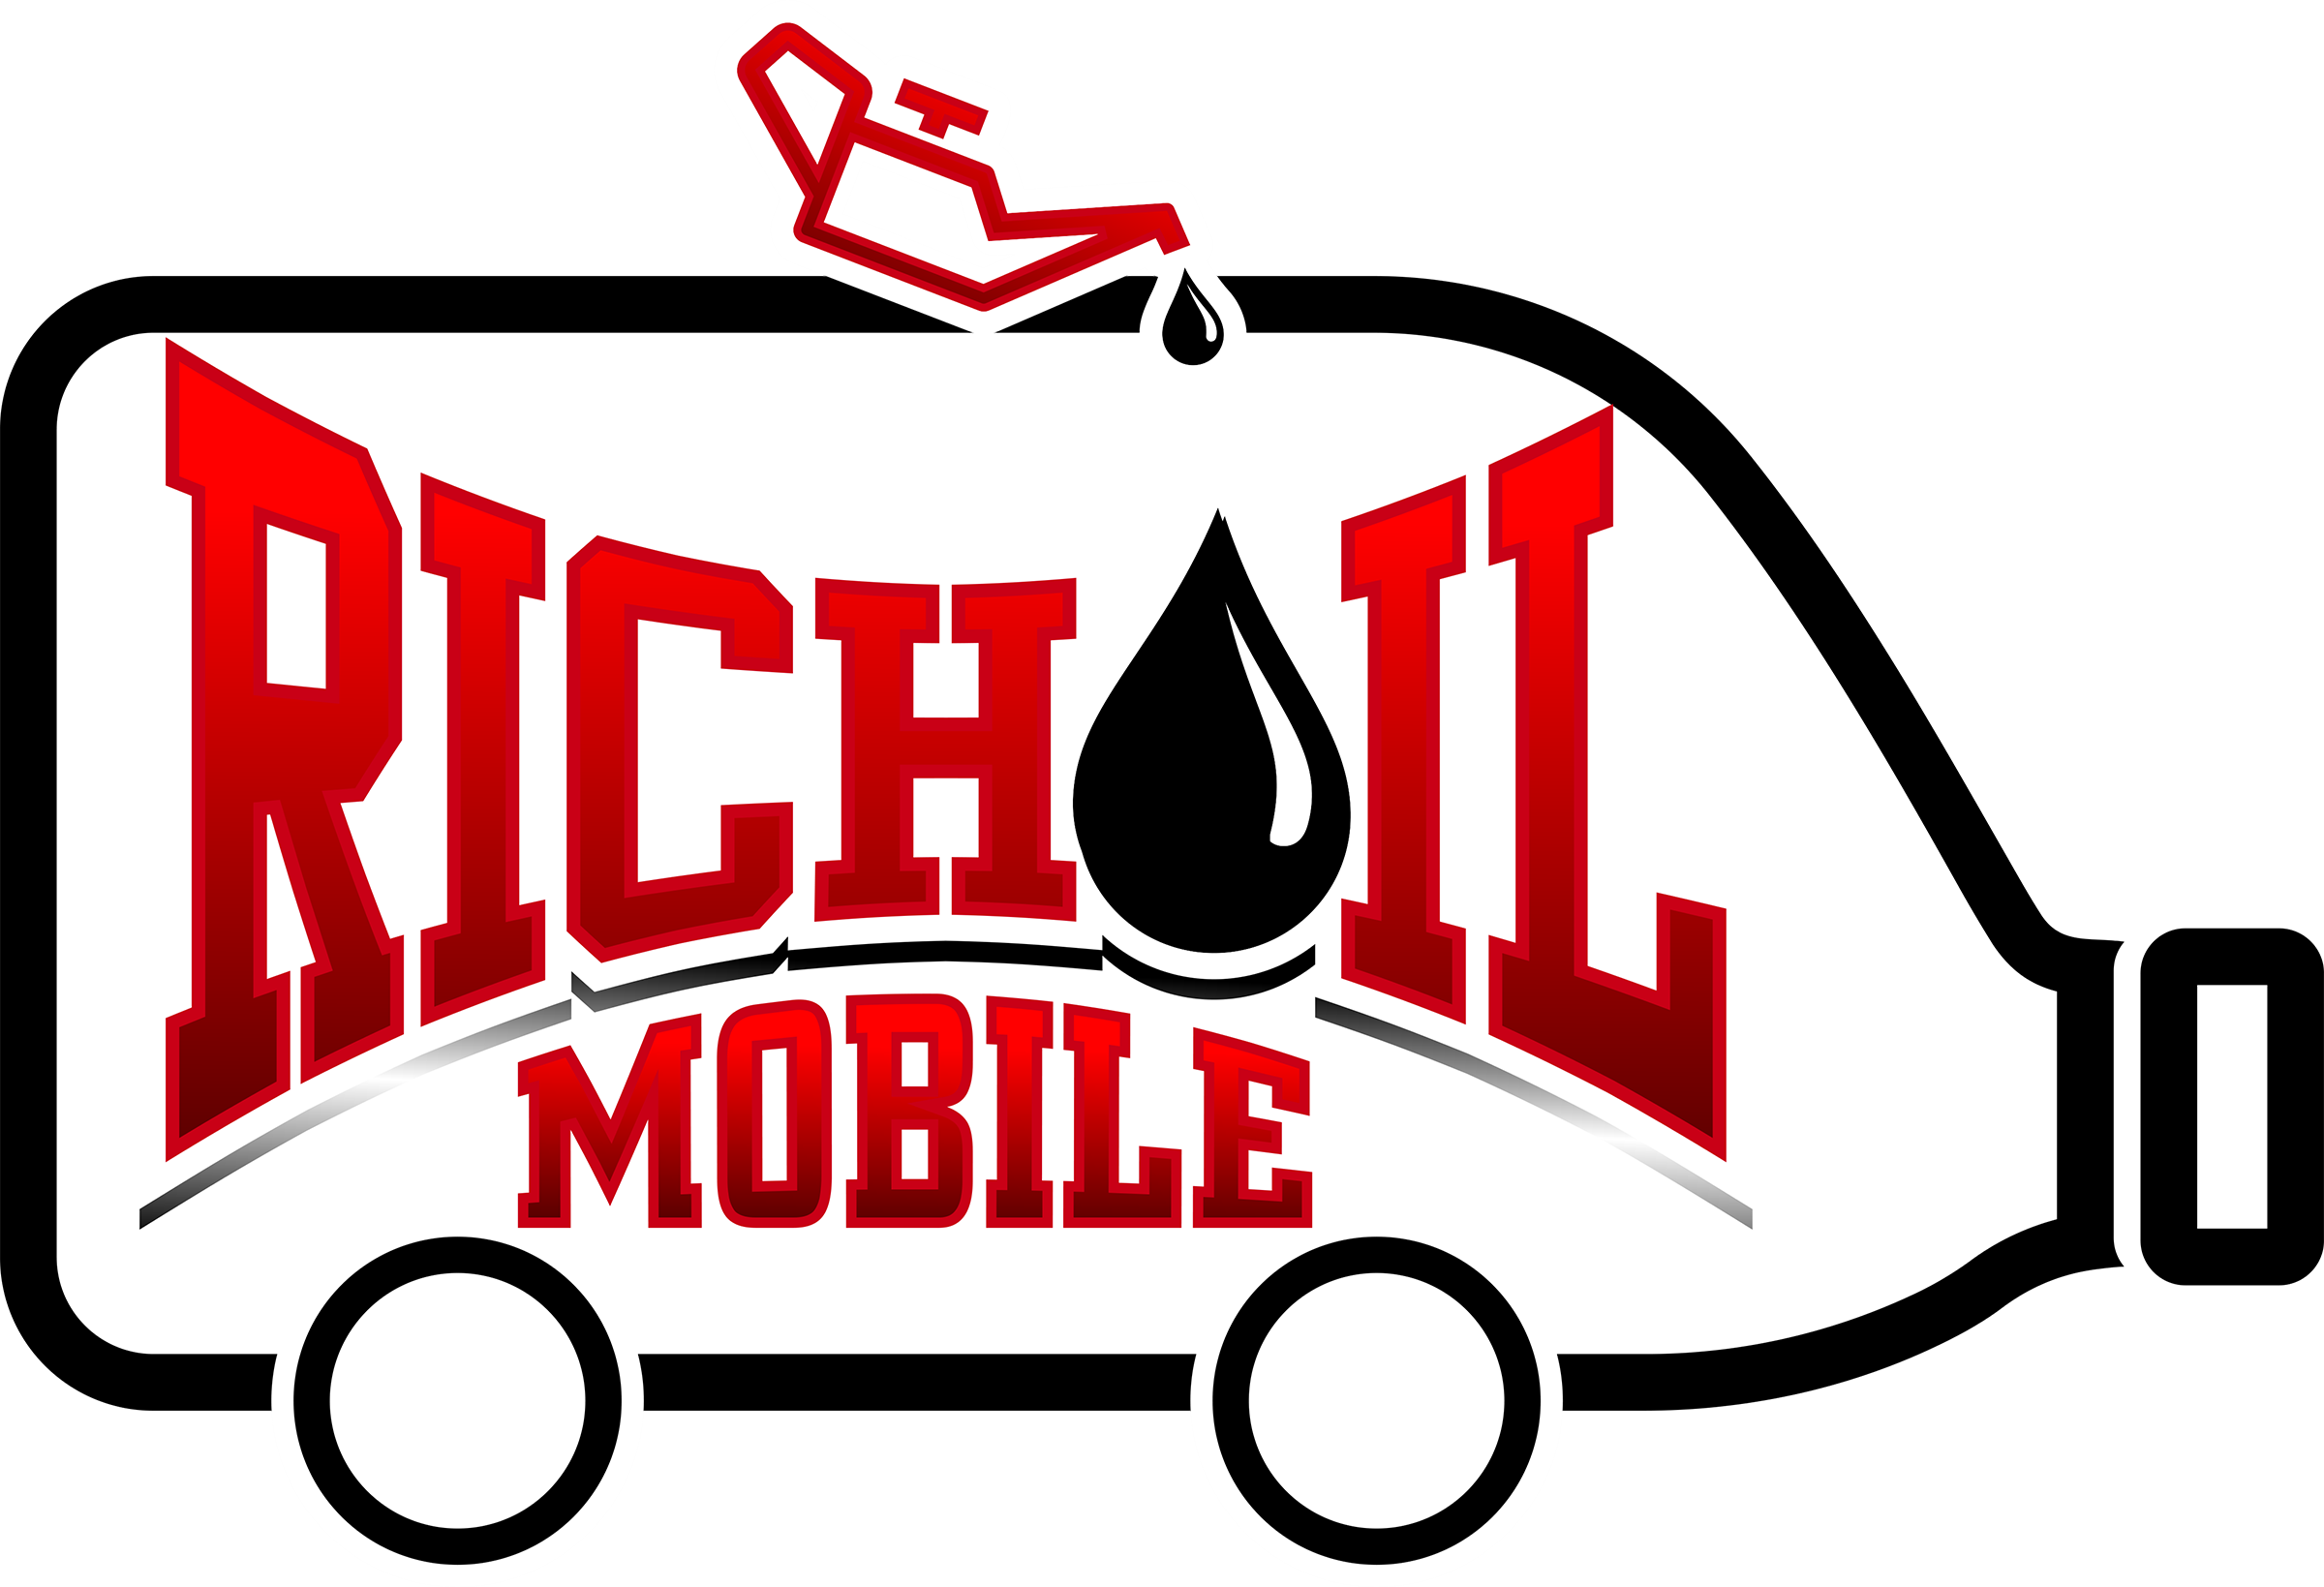 Get A Mobile Oil Change In Midland, Tx Right Away - Richoil Mobile Llc (2400x1639)